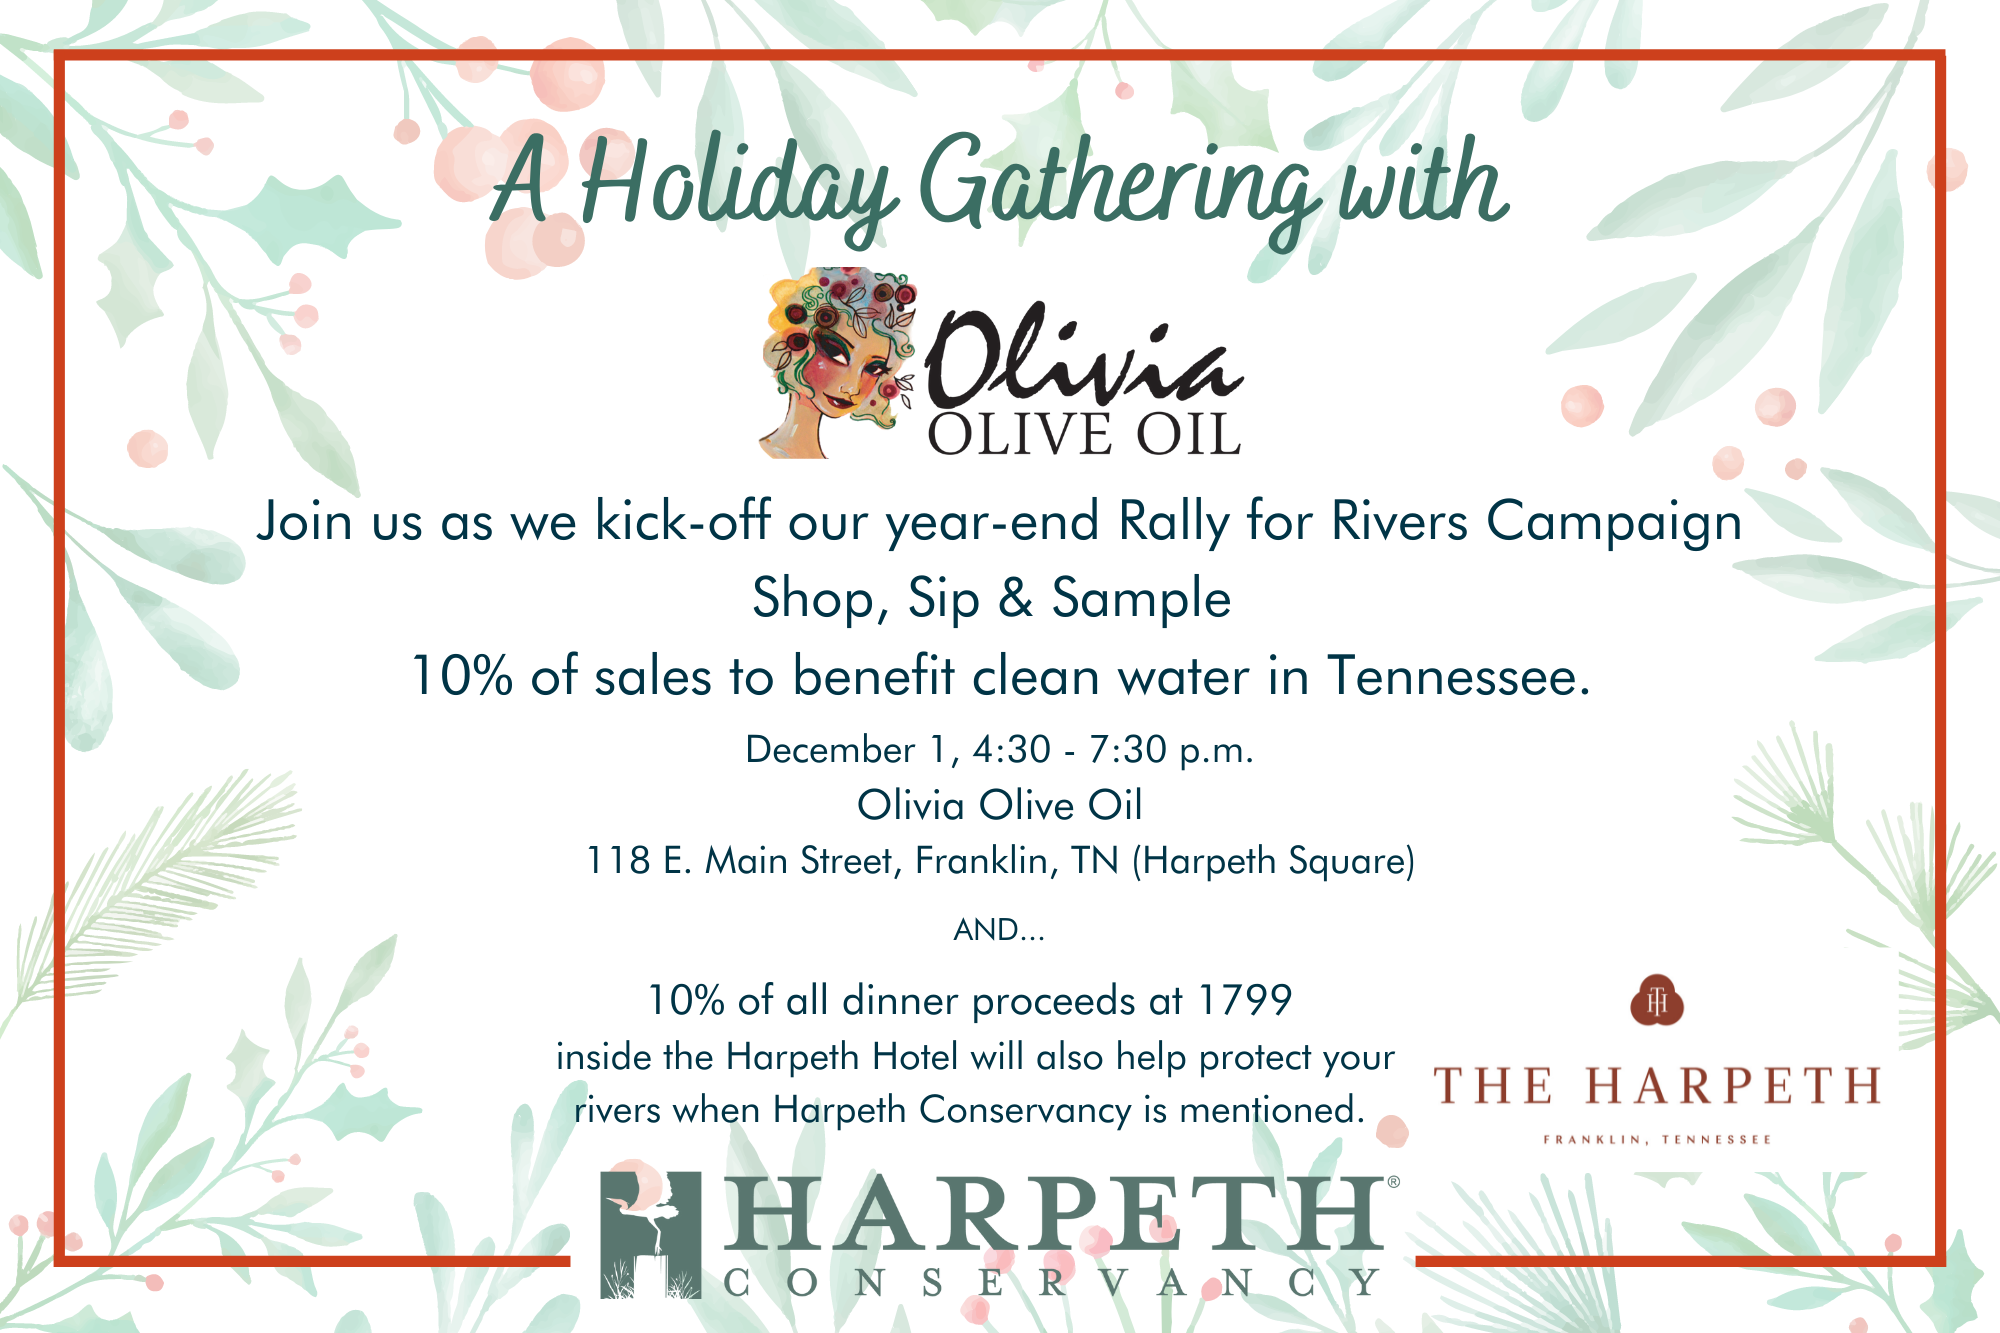 Harpeth Conservancy's Holiday Gathering